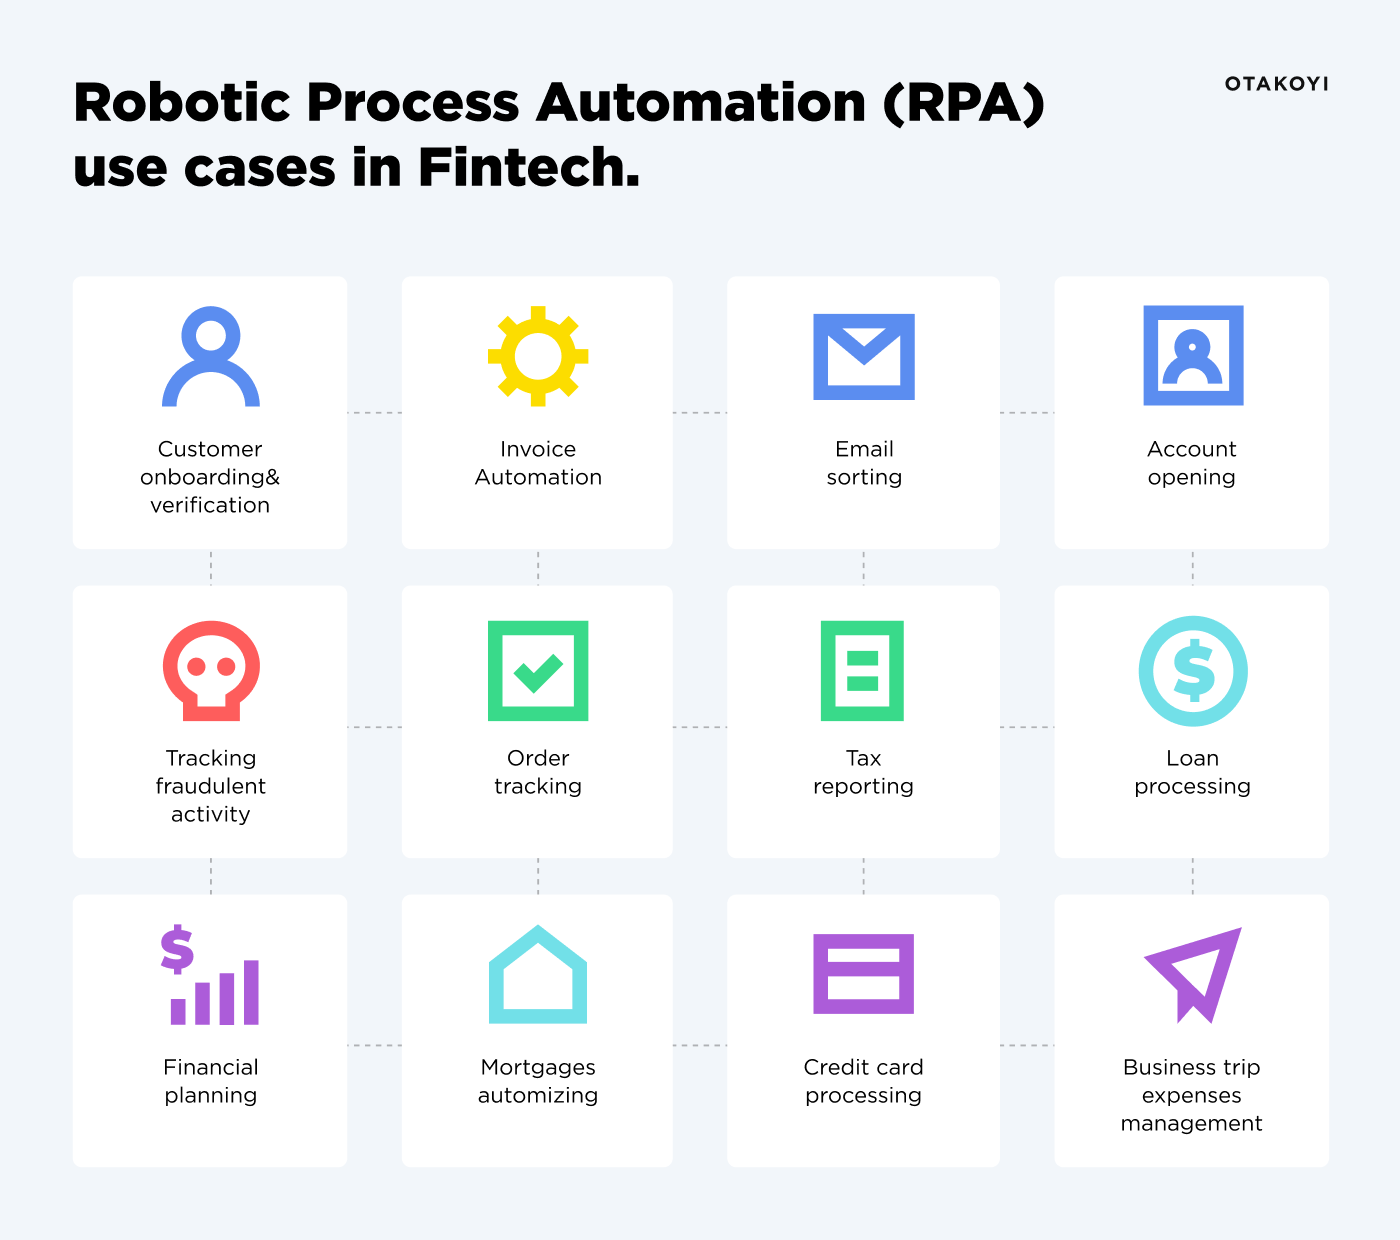 RPA use cases in Fintech